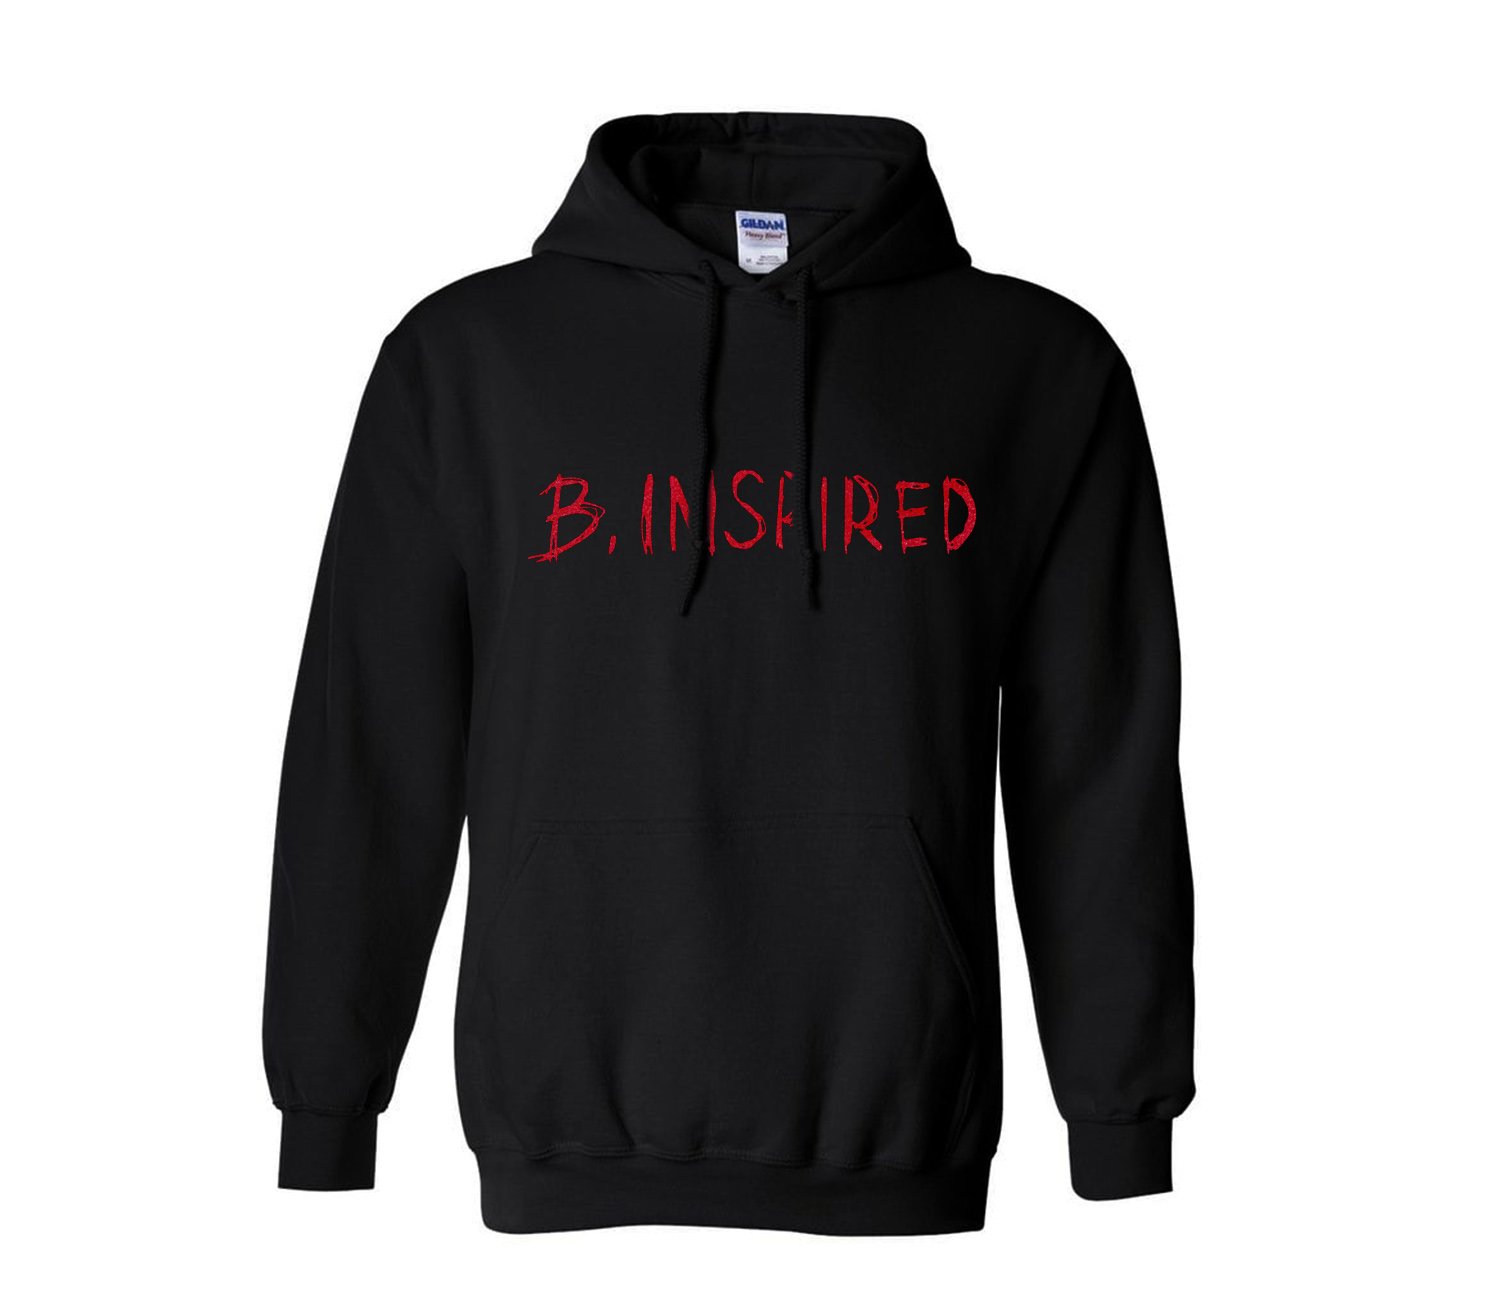 B.Inspired Tour Hoodie | Bugzy Malone Online Shop